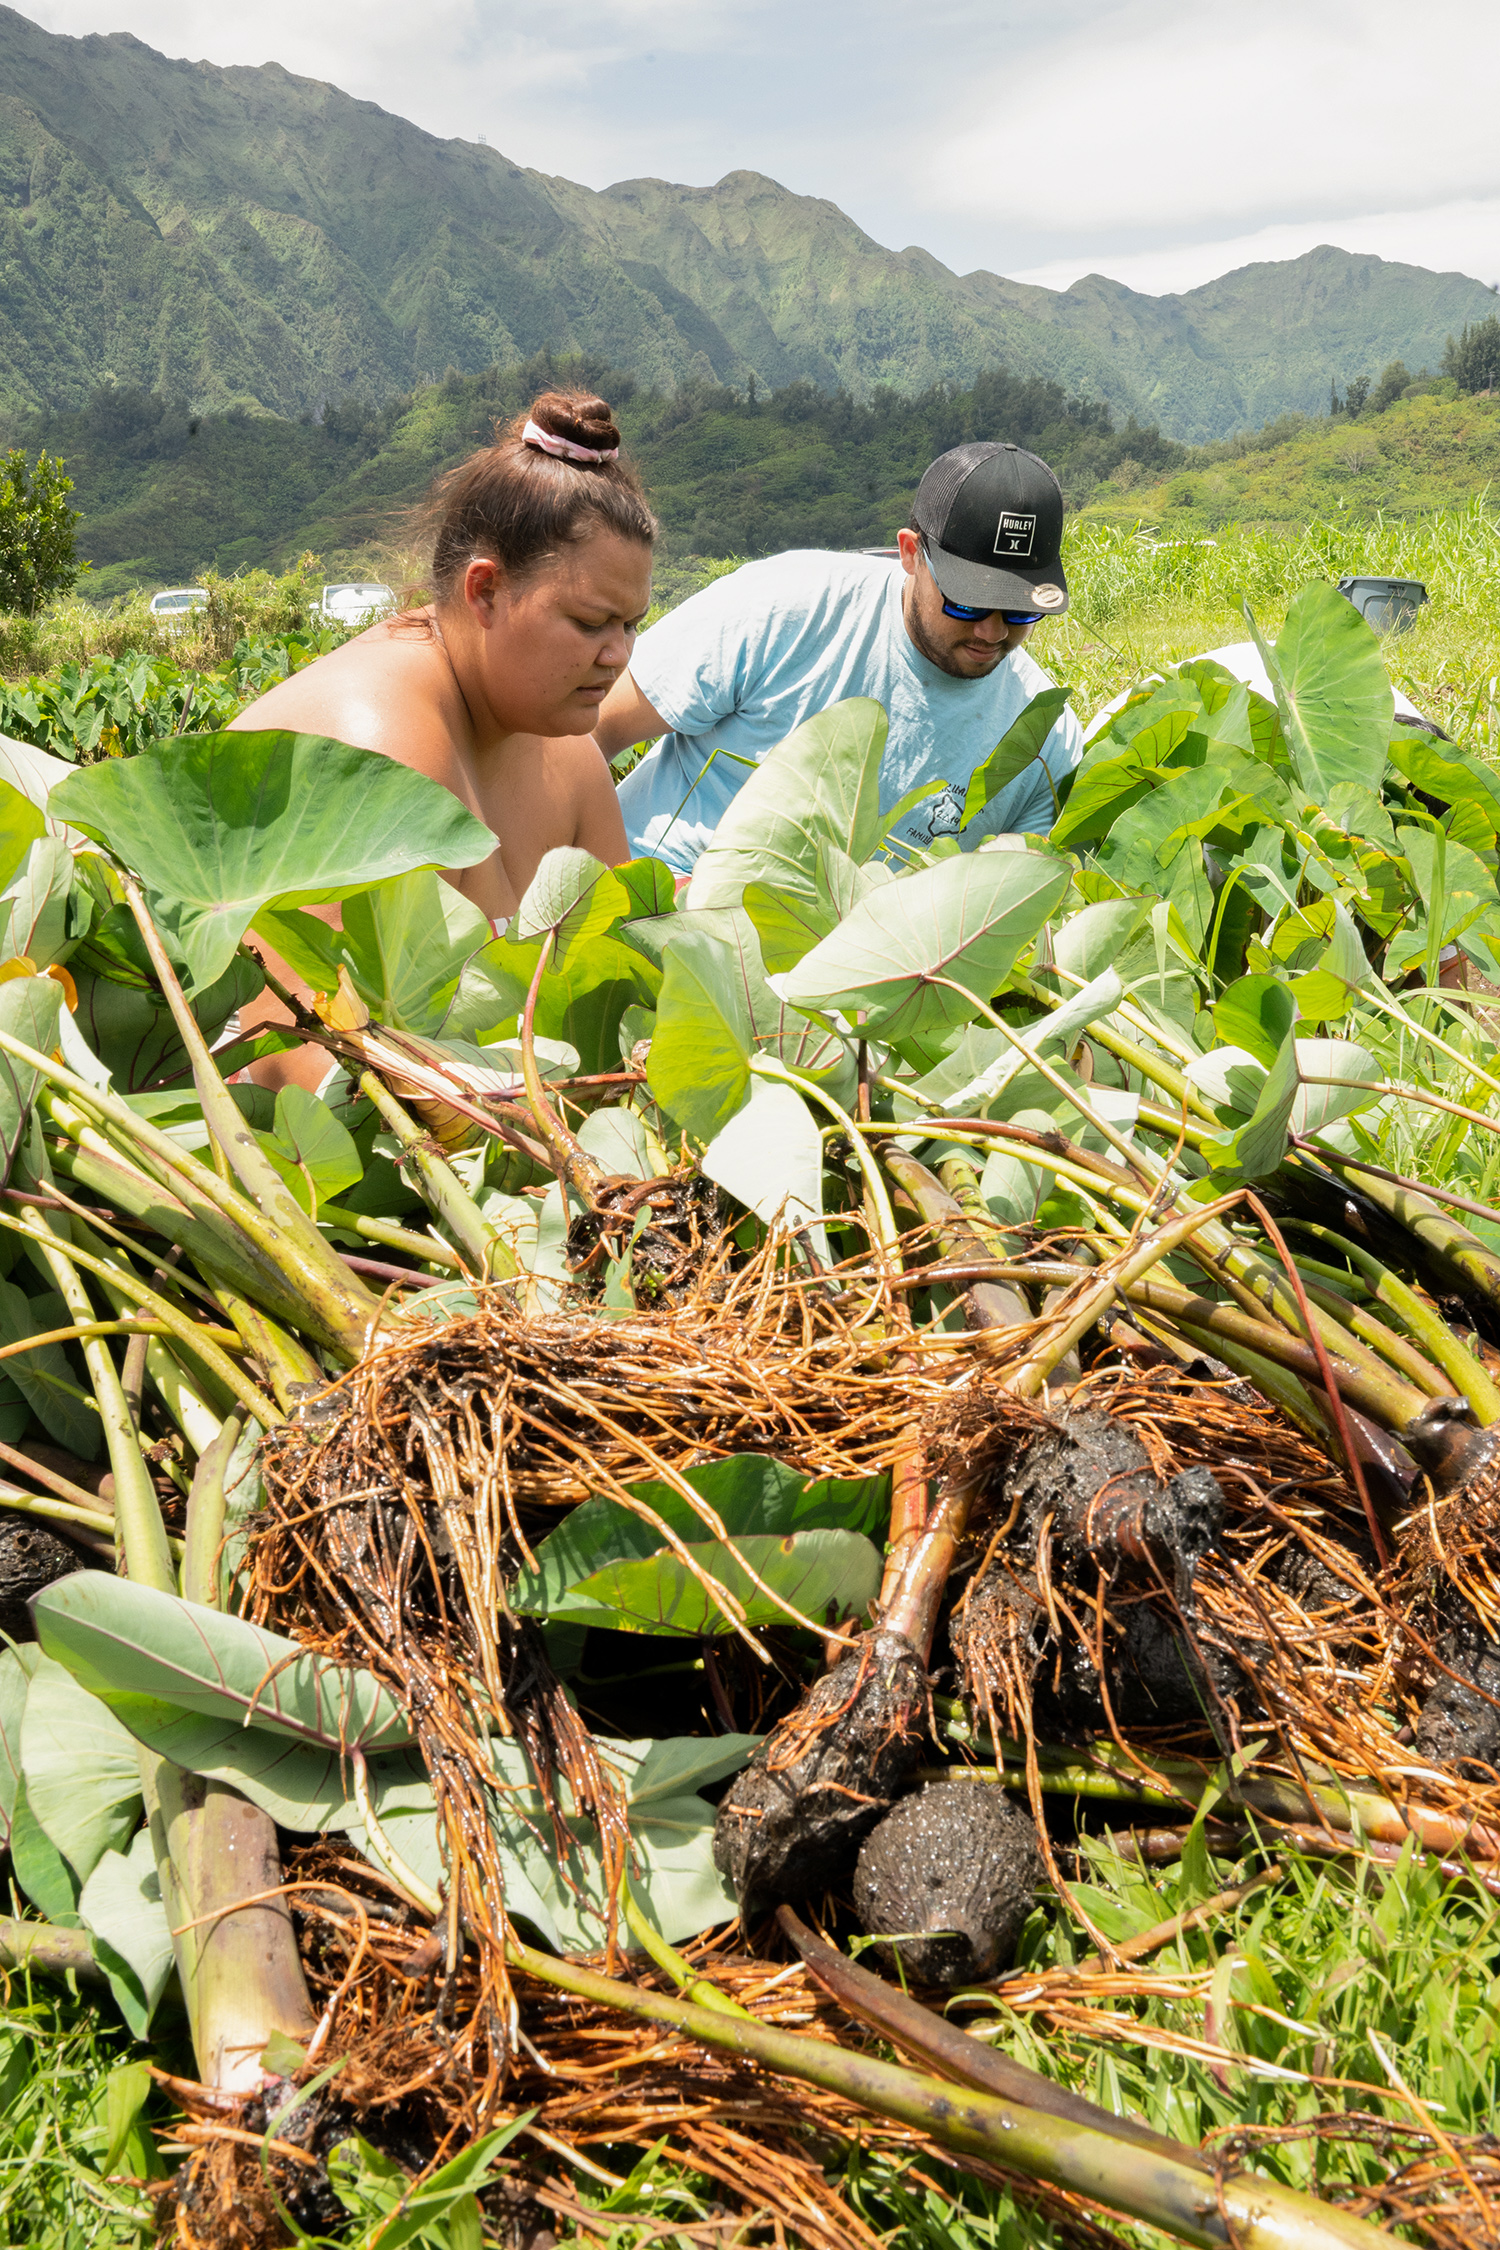 A photograph of several taro plants lying in the foreground while a woman and man are pictured in the background.